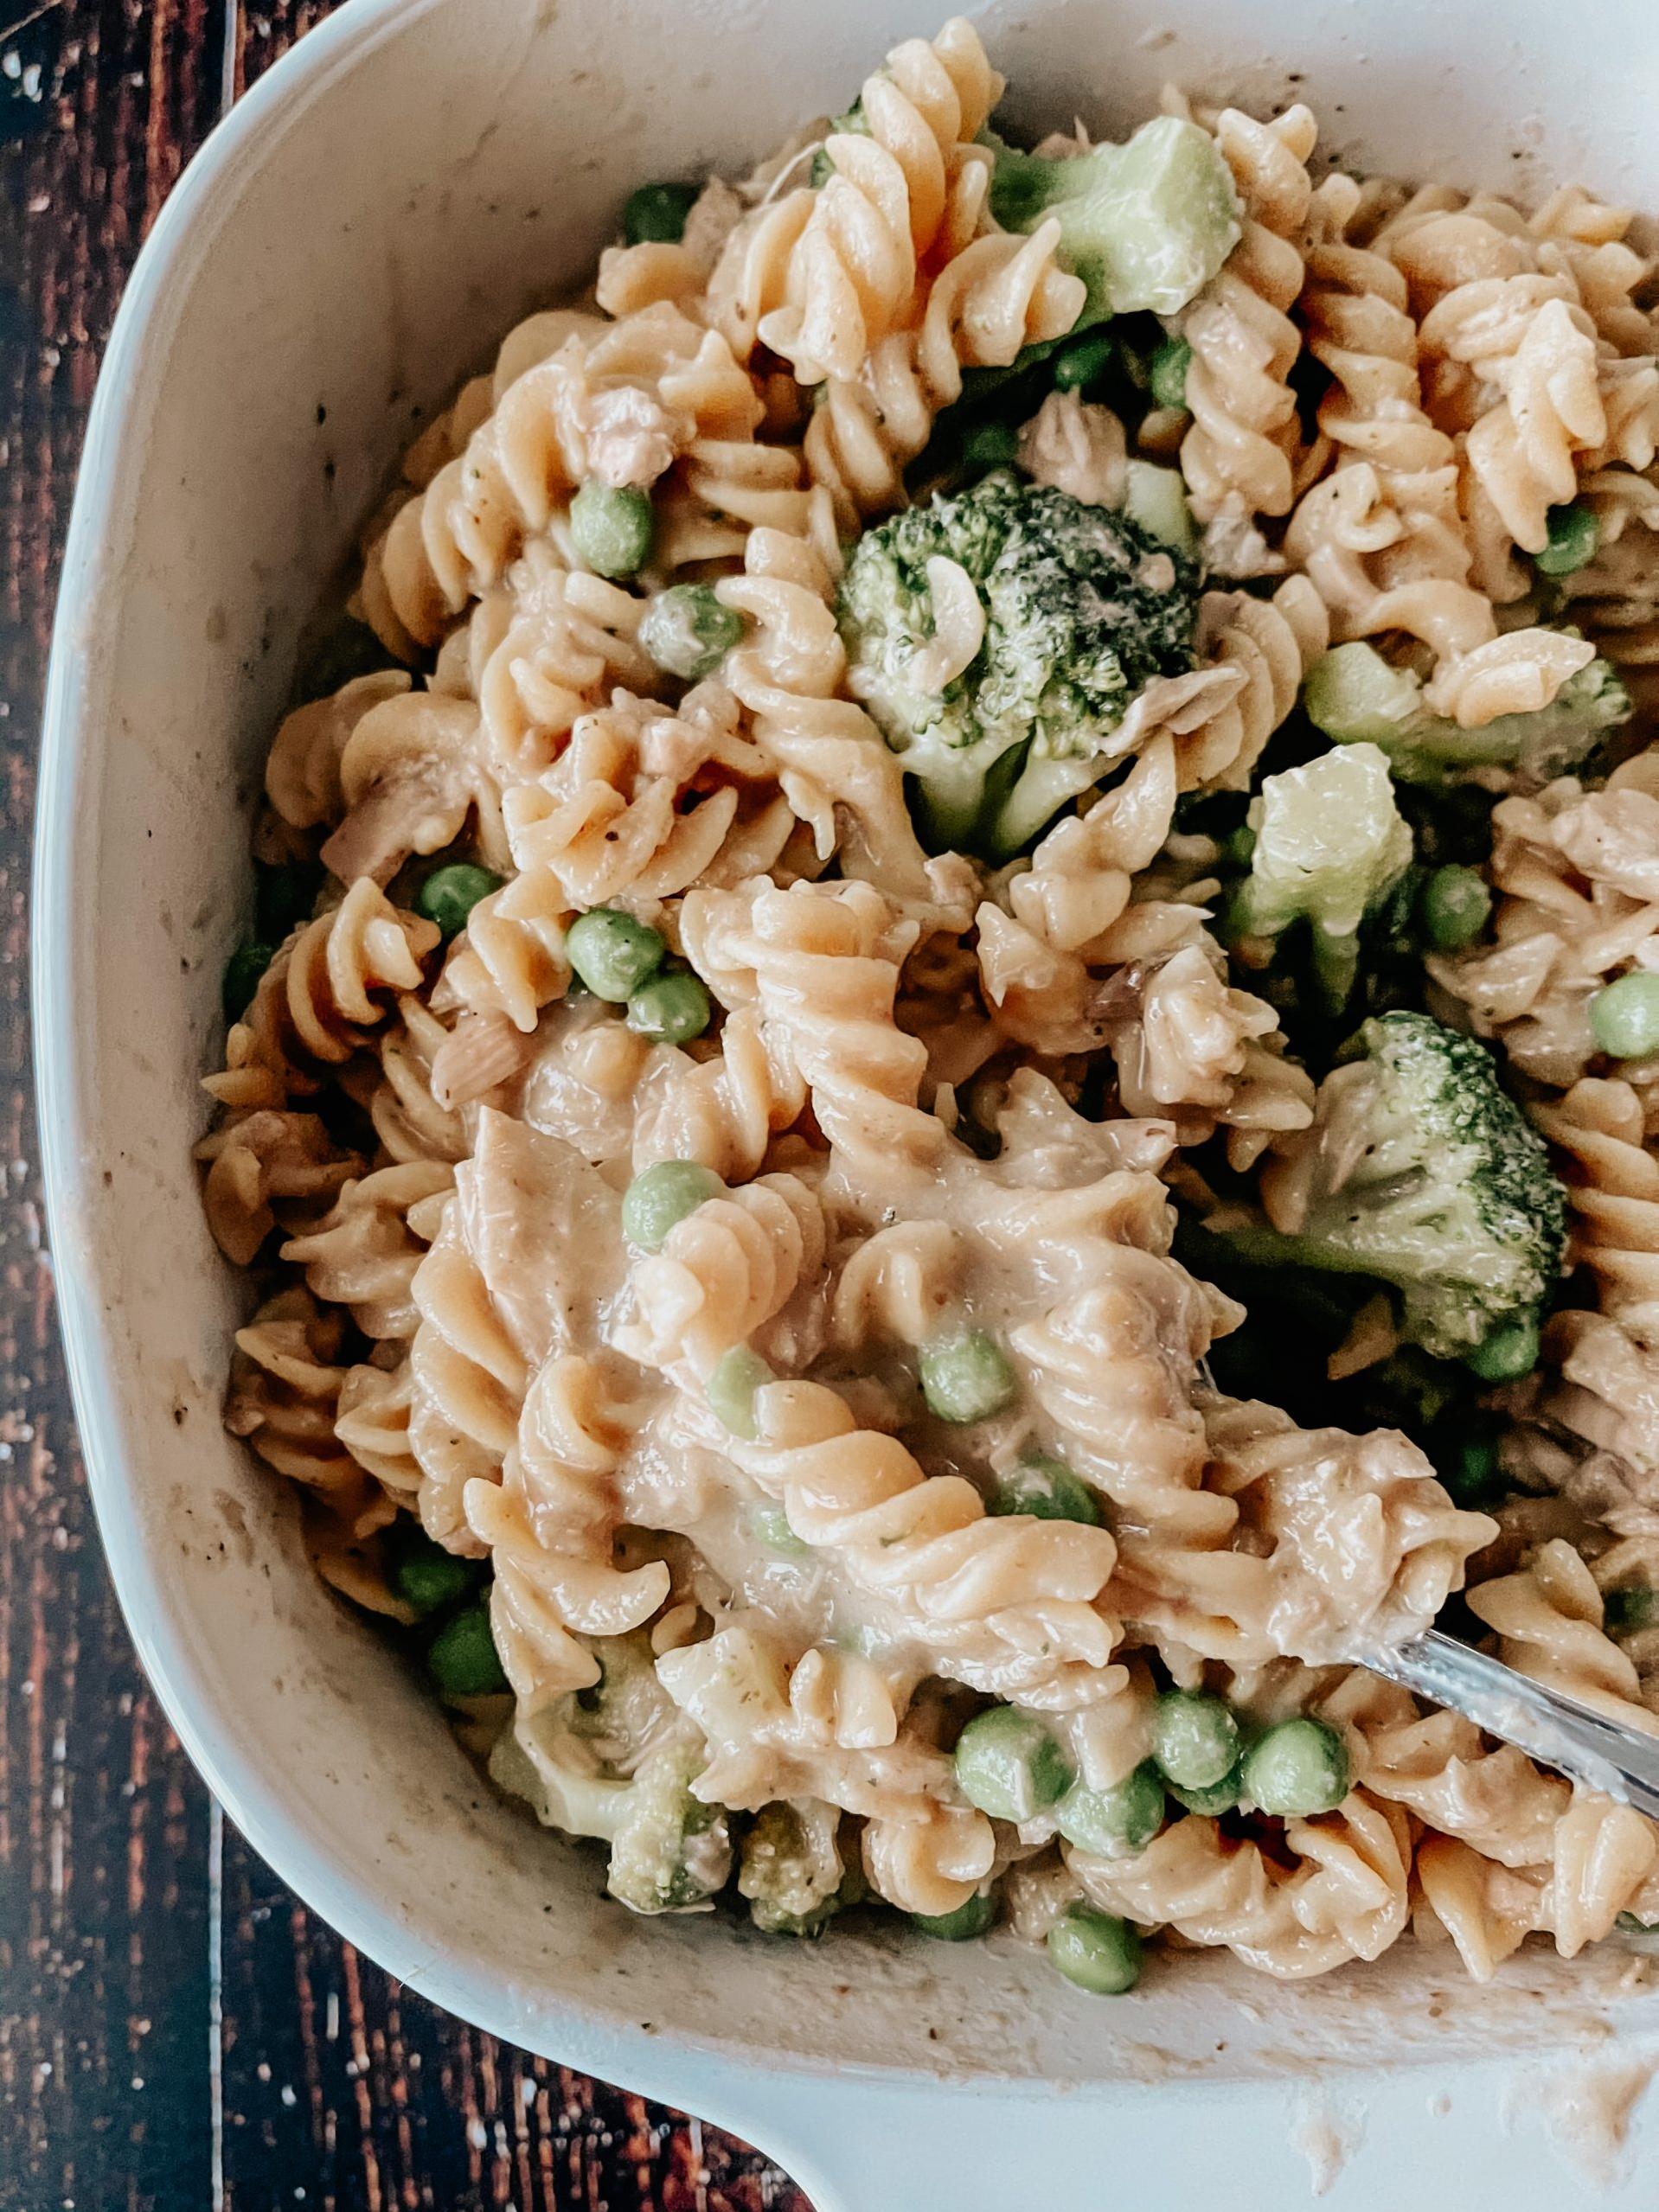  Creamy but dairy-free? This homemade sauce makes it possible!